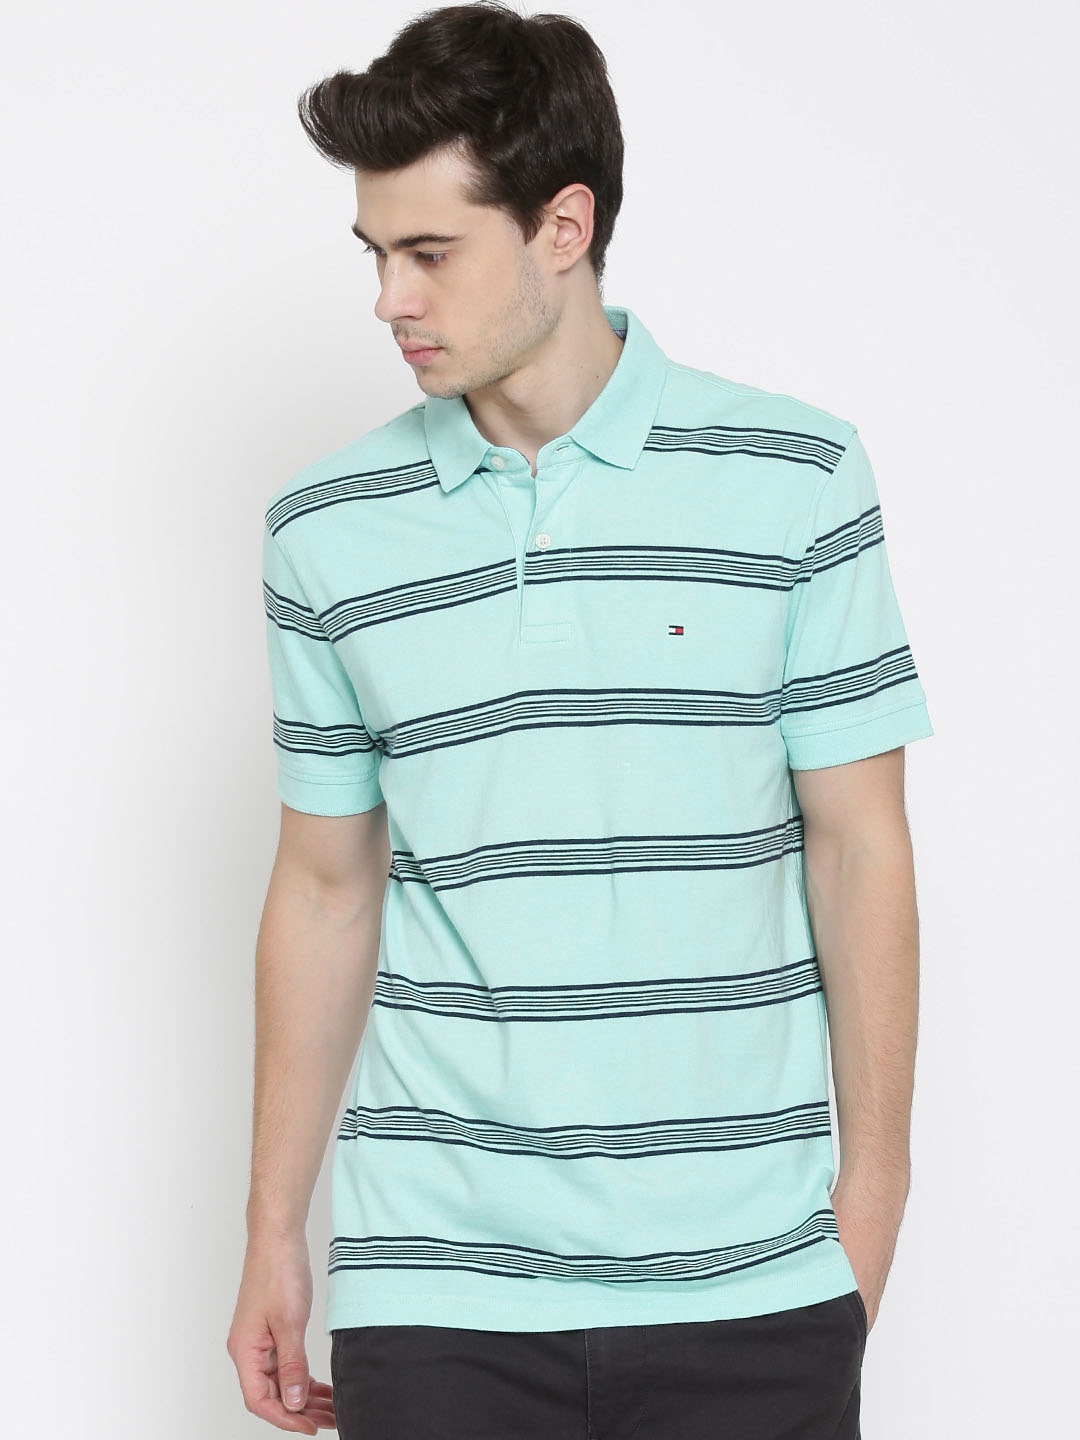 tommy hilfiger polo shirt price